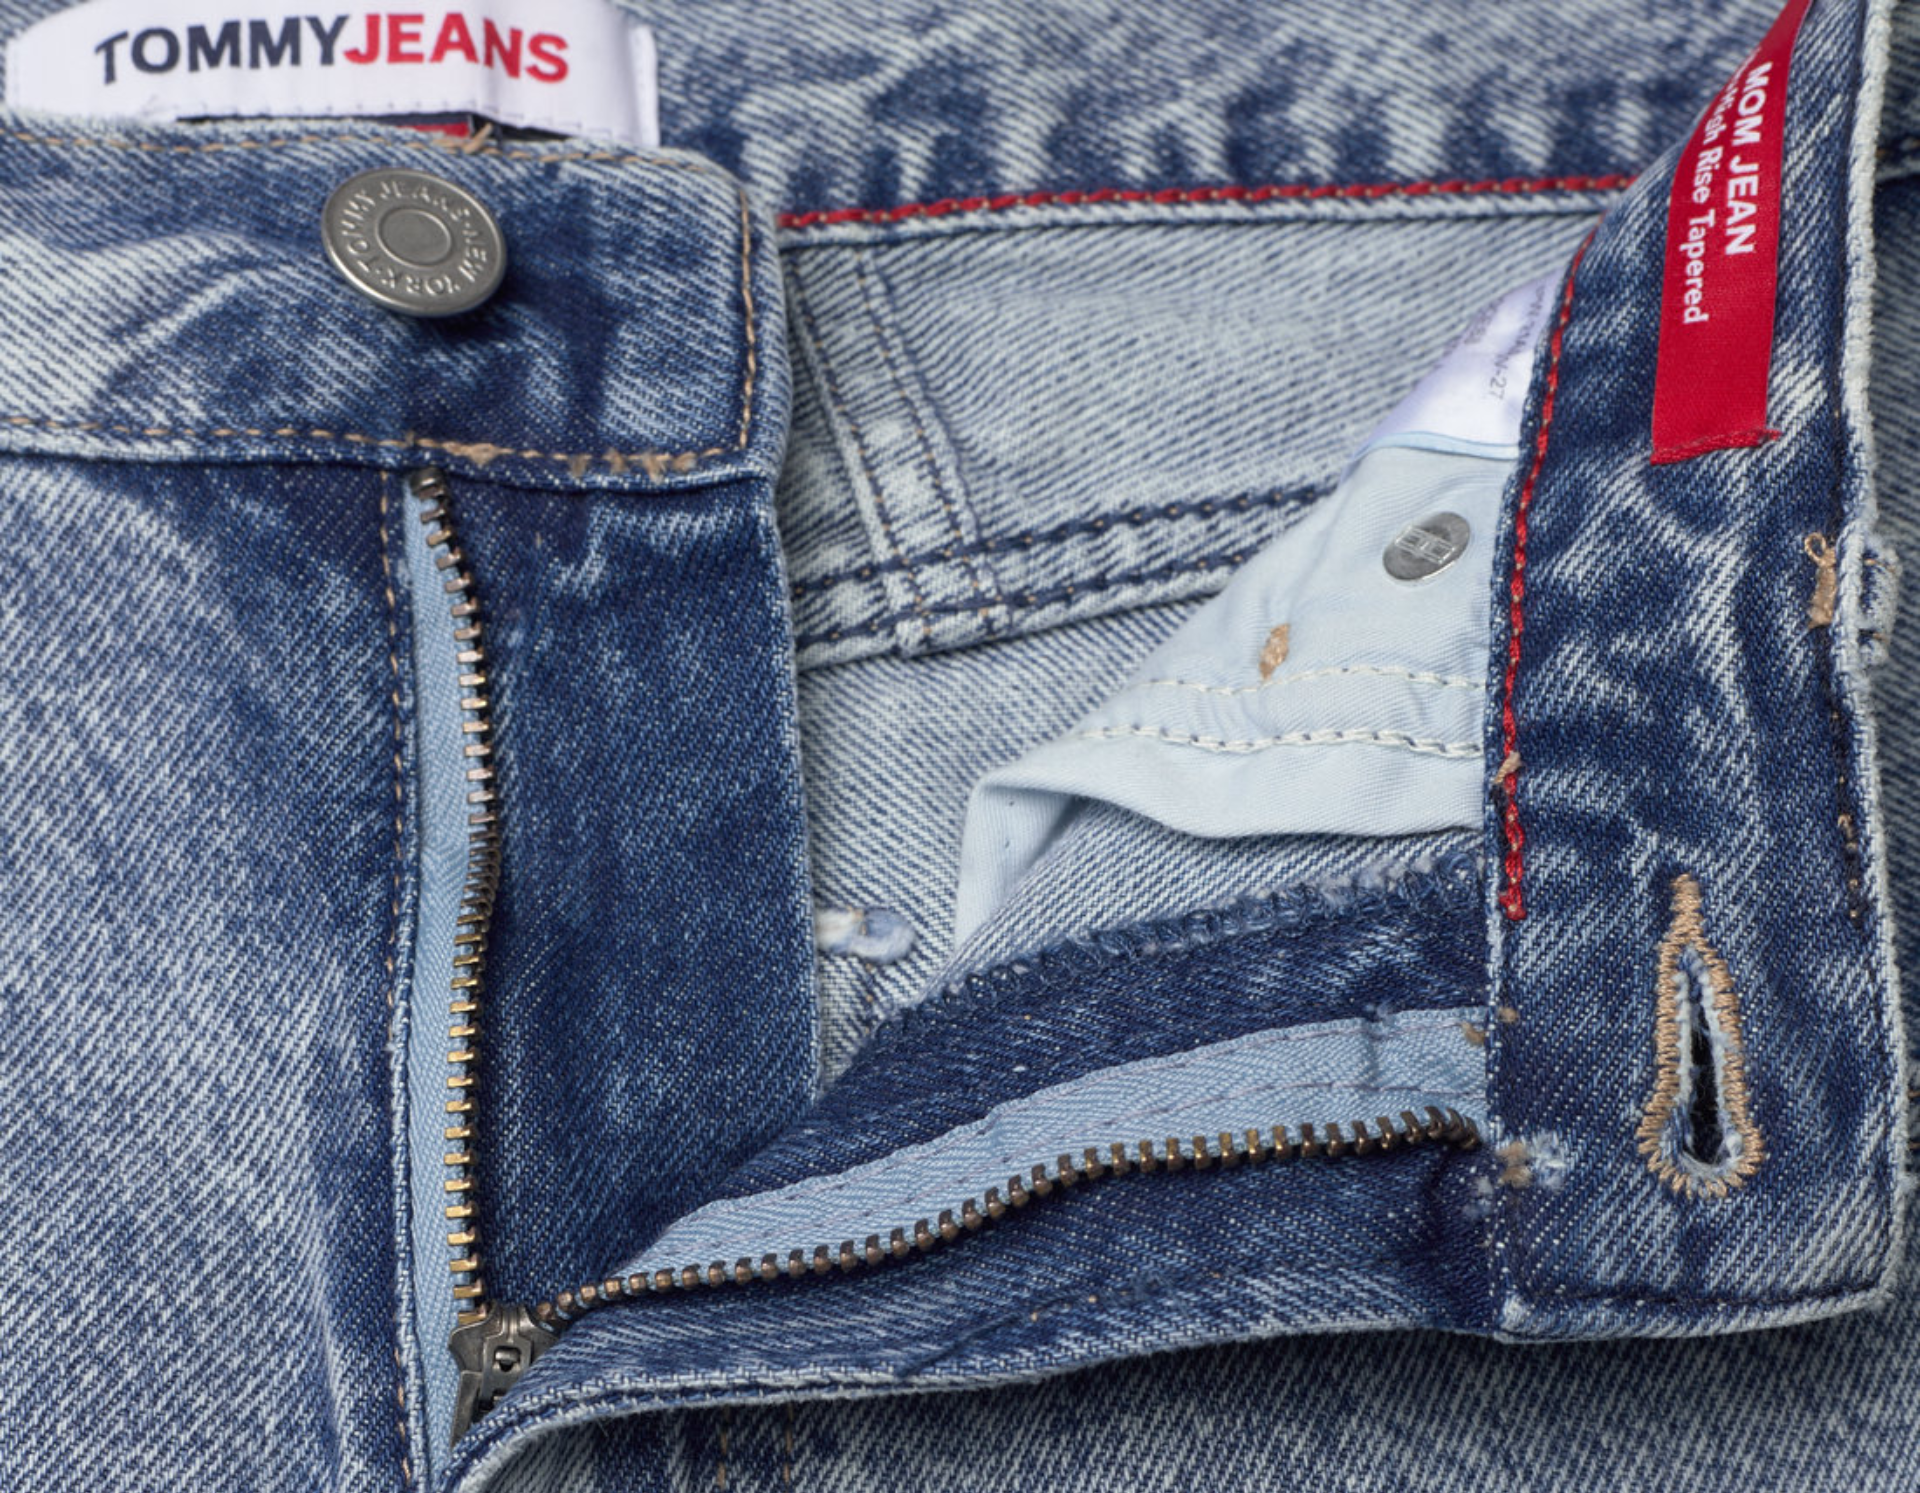 Behind the Patch: The Evolution of Tommy Jeans